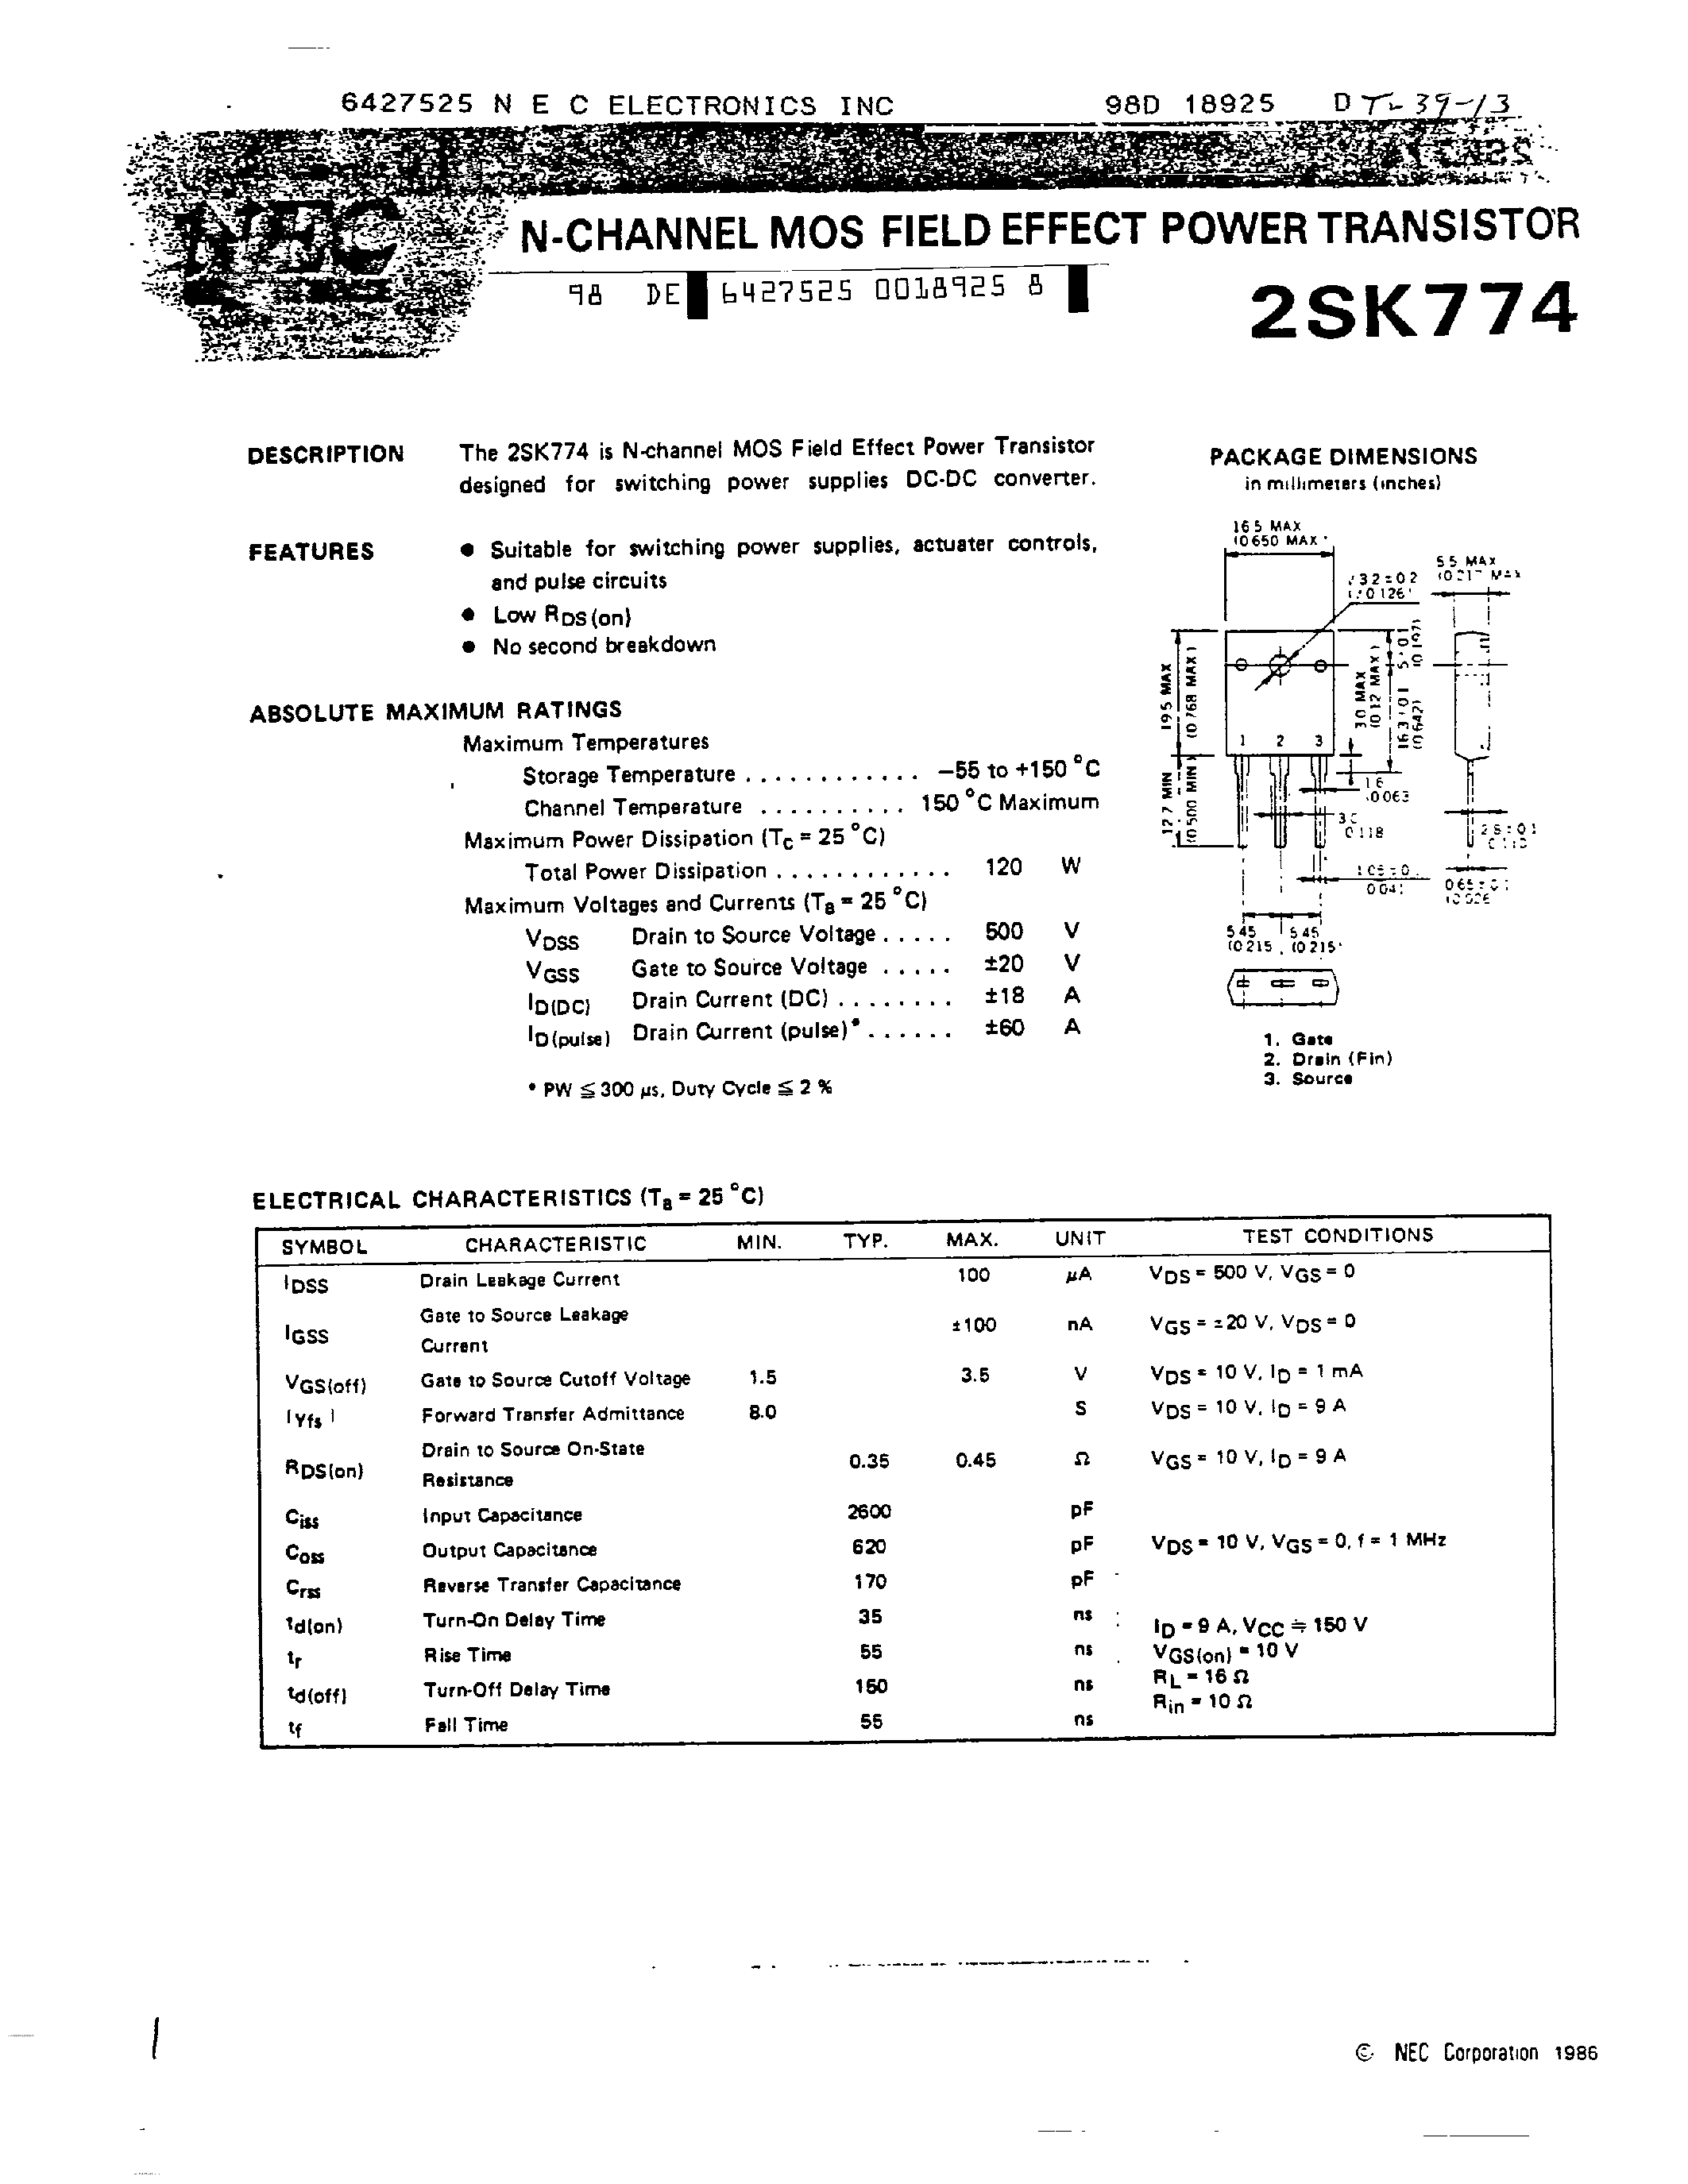 Datasheet K774 - Search -----> 2SK774 page 1